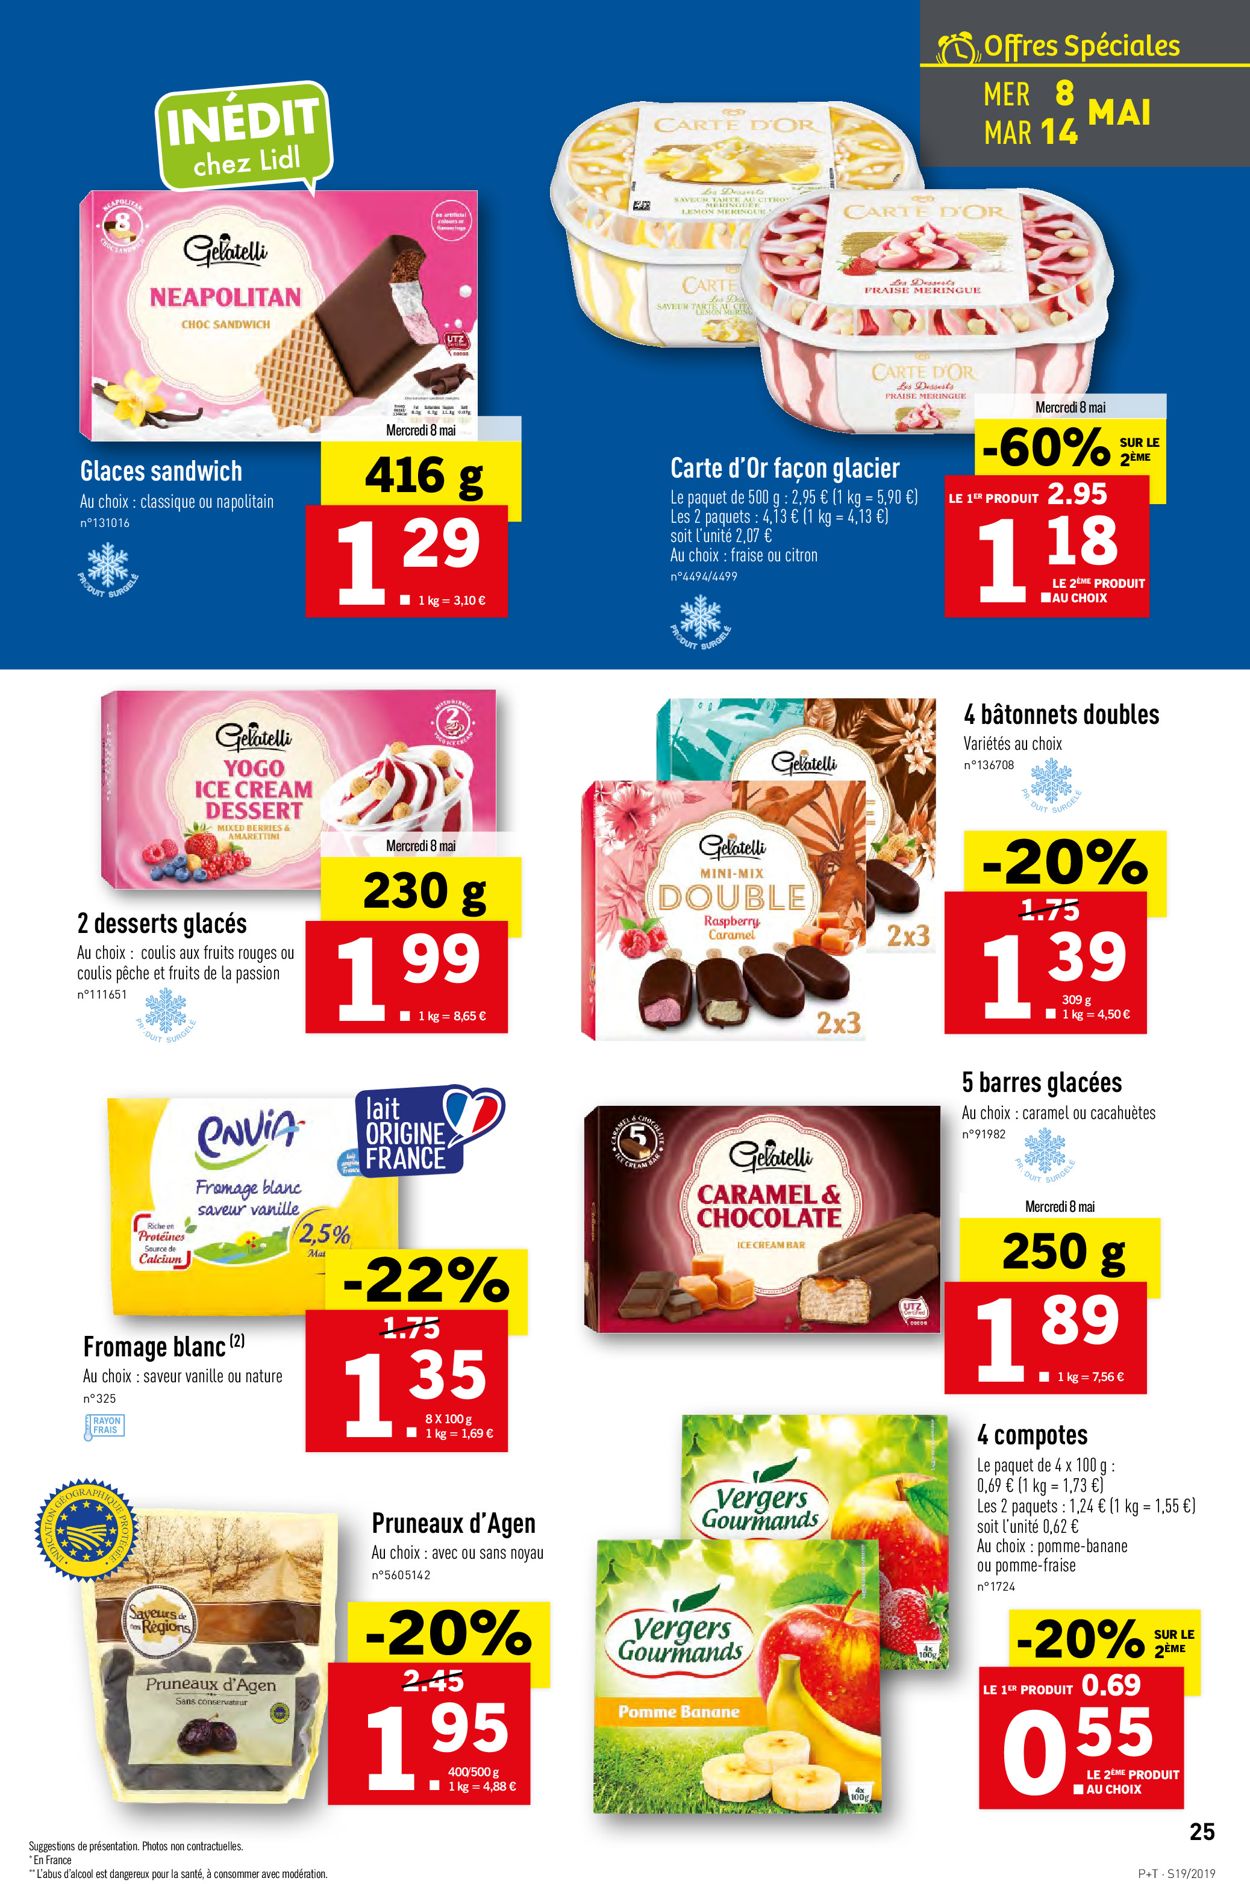 Lidl Catalogue - 08.05-14.05.2019 (Page 25)